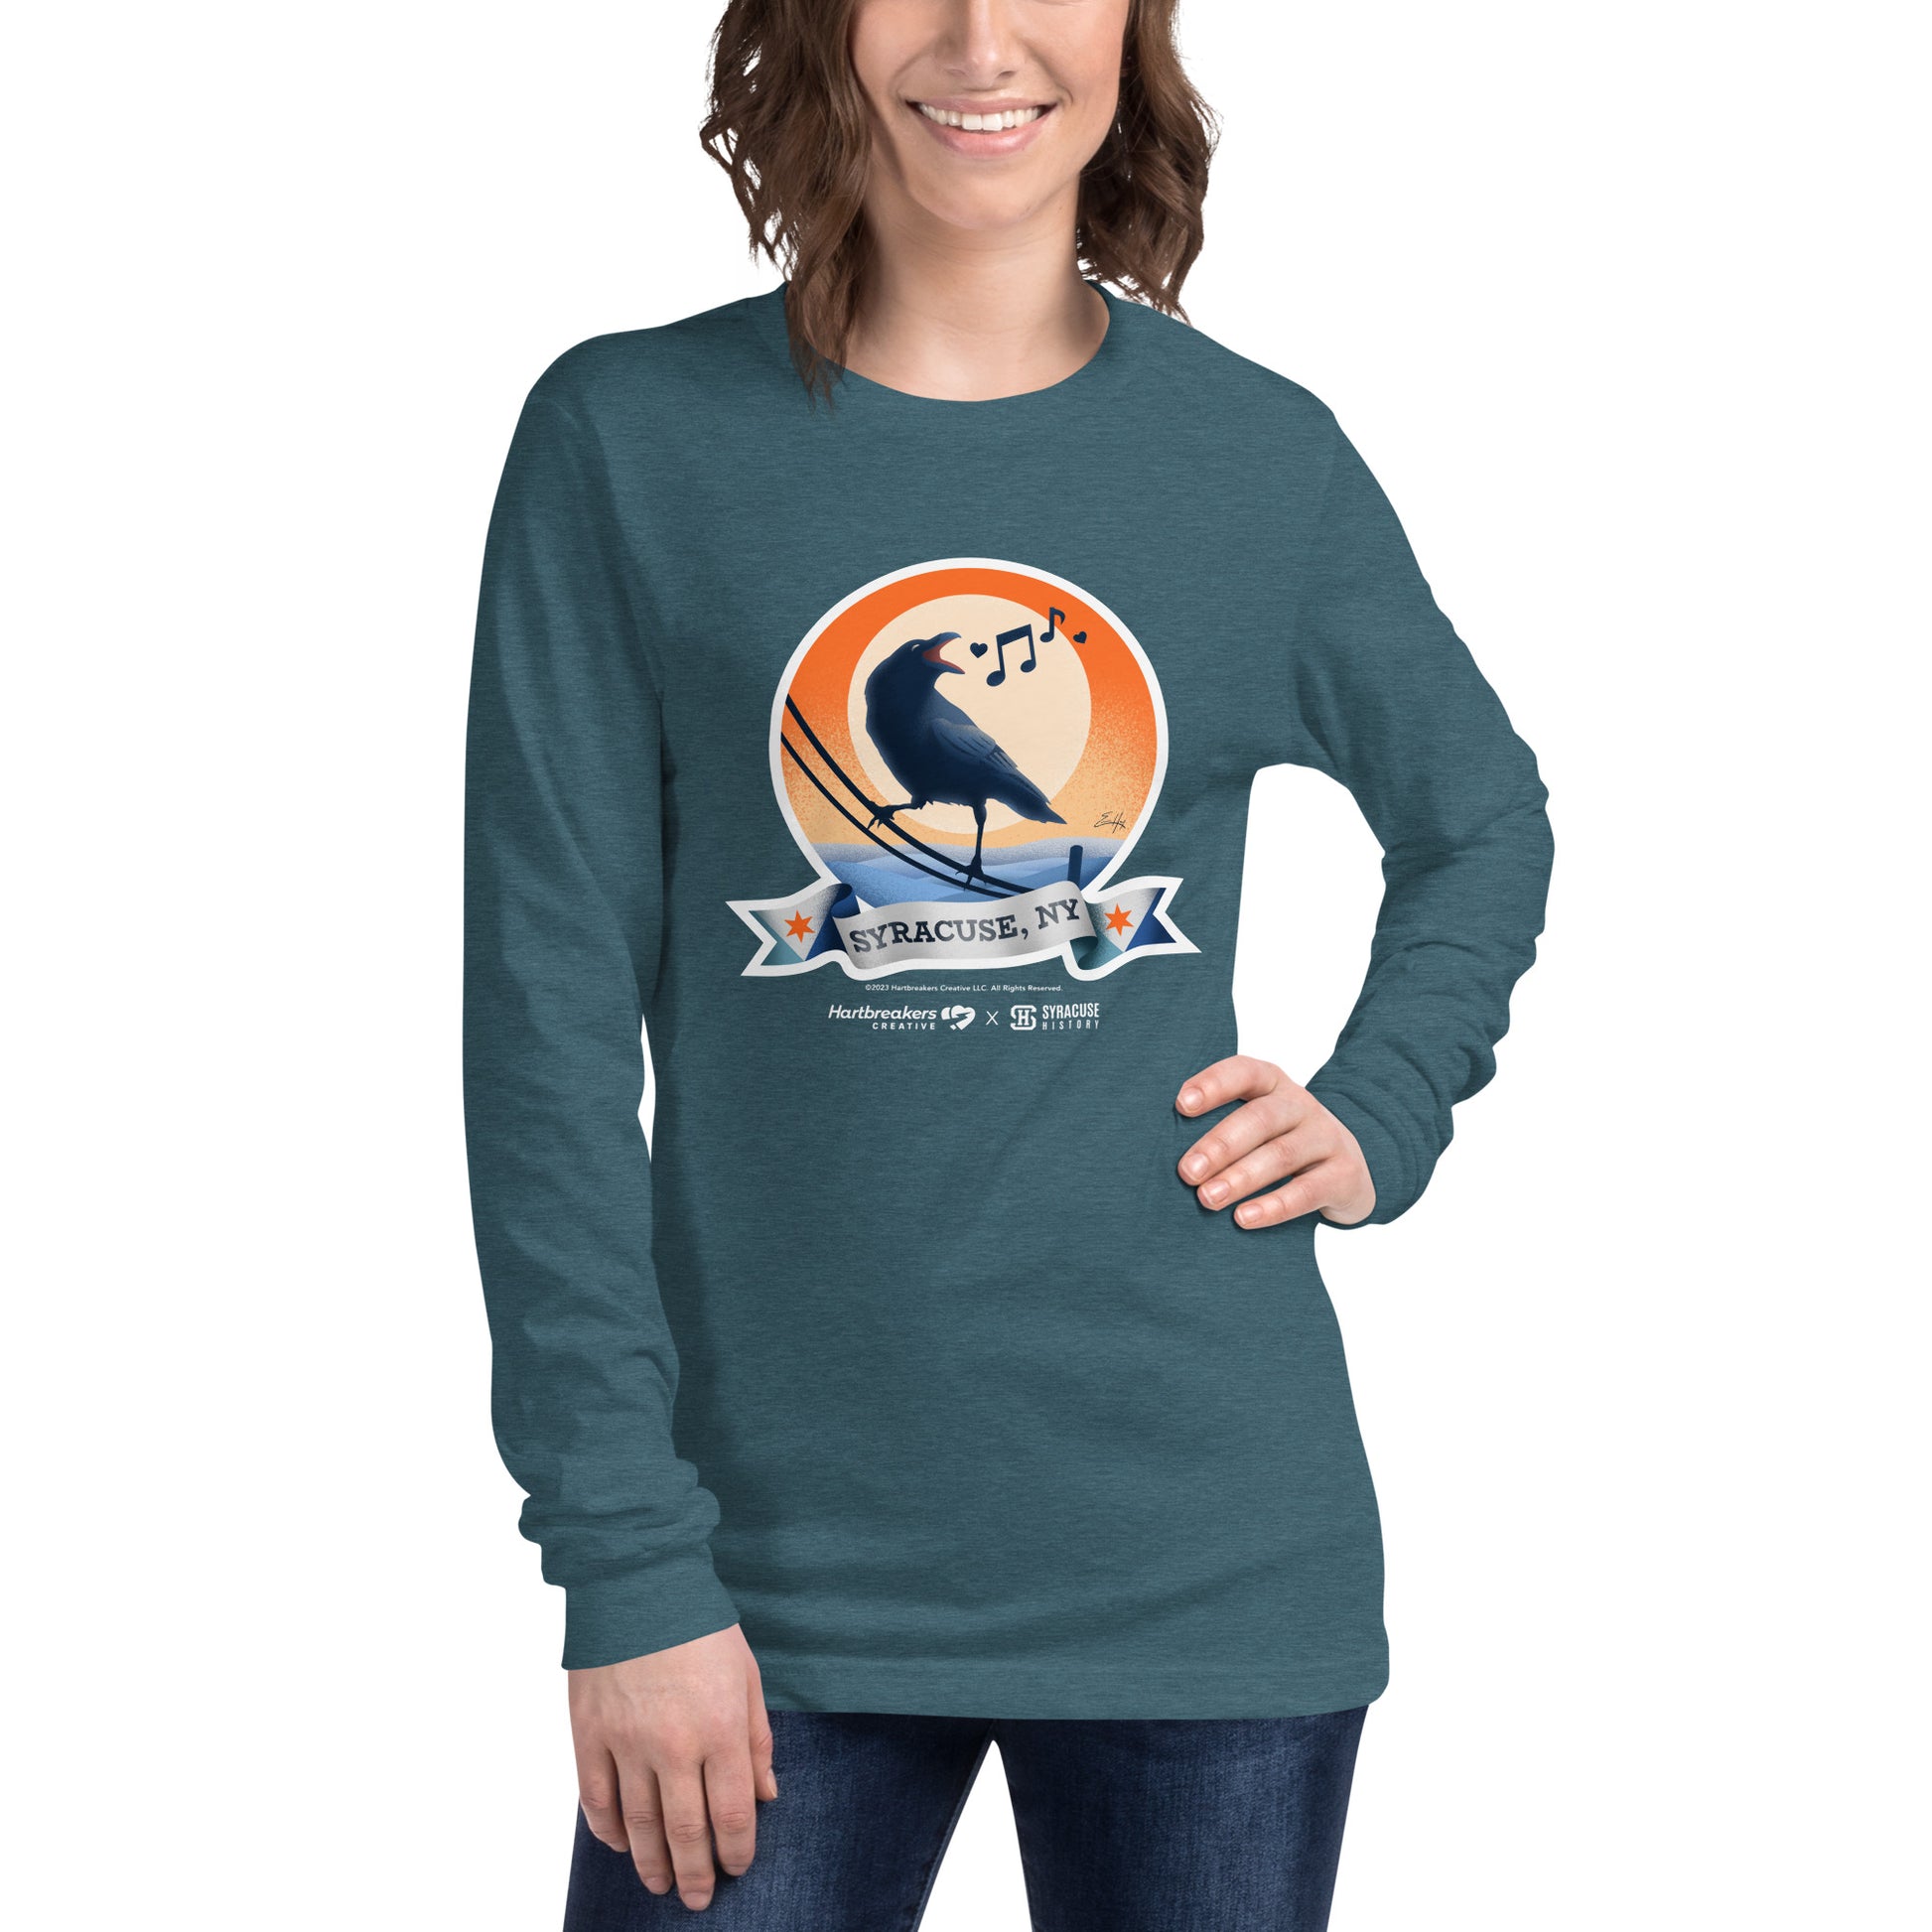 A woman wearing a heather teal long sleeve T-shirt featuring an illustration of a crow on a telephone wire and a banner beneath it that says Syracuse, NY